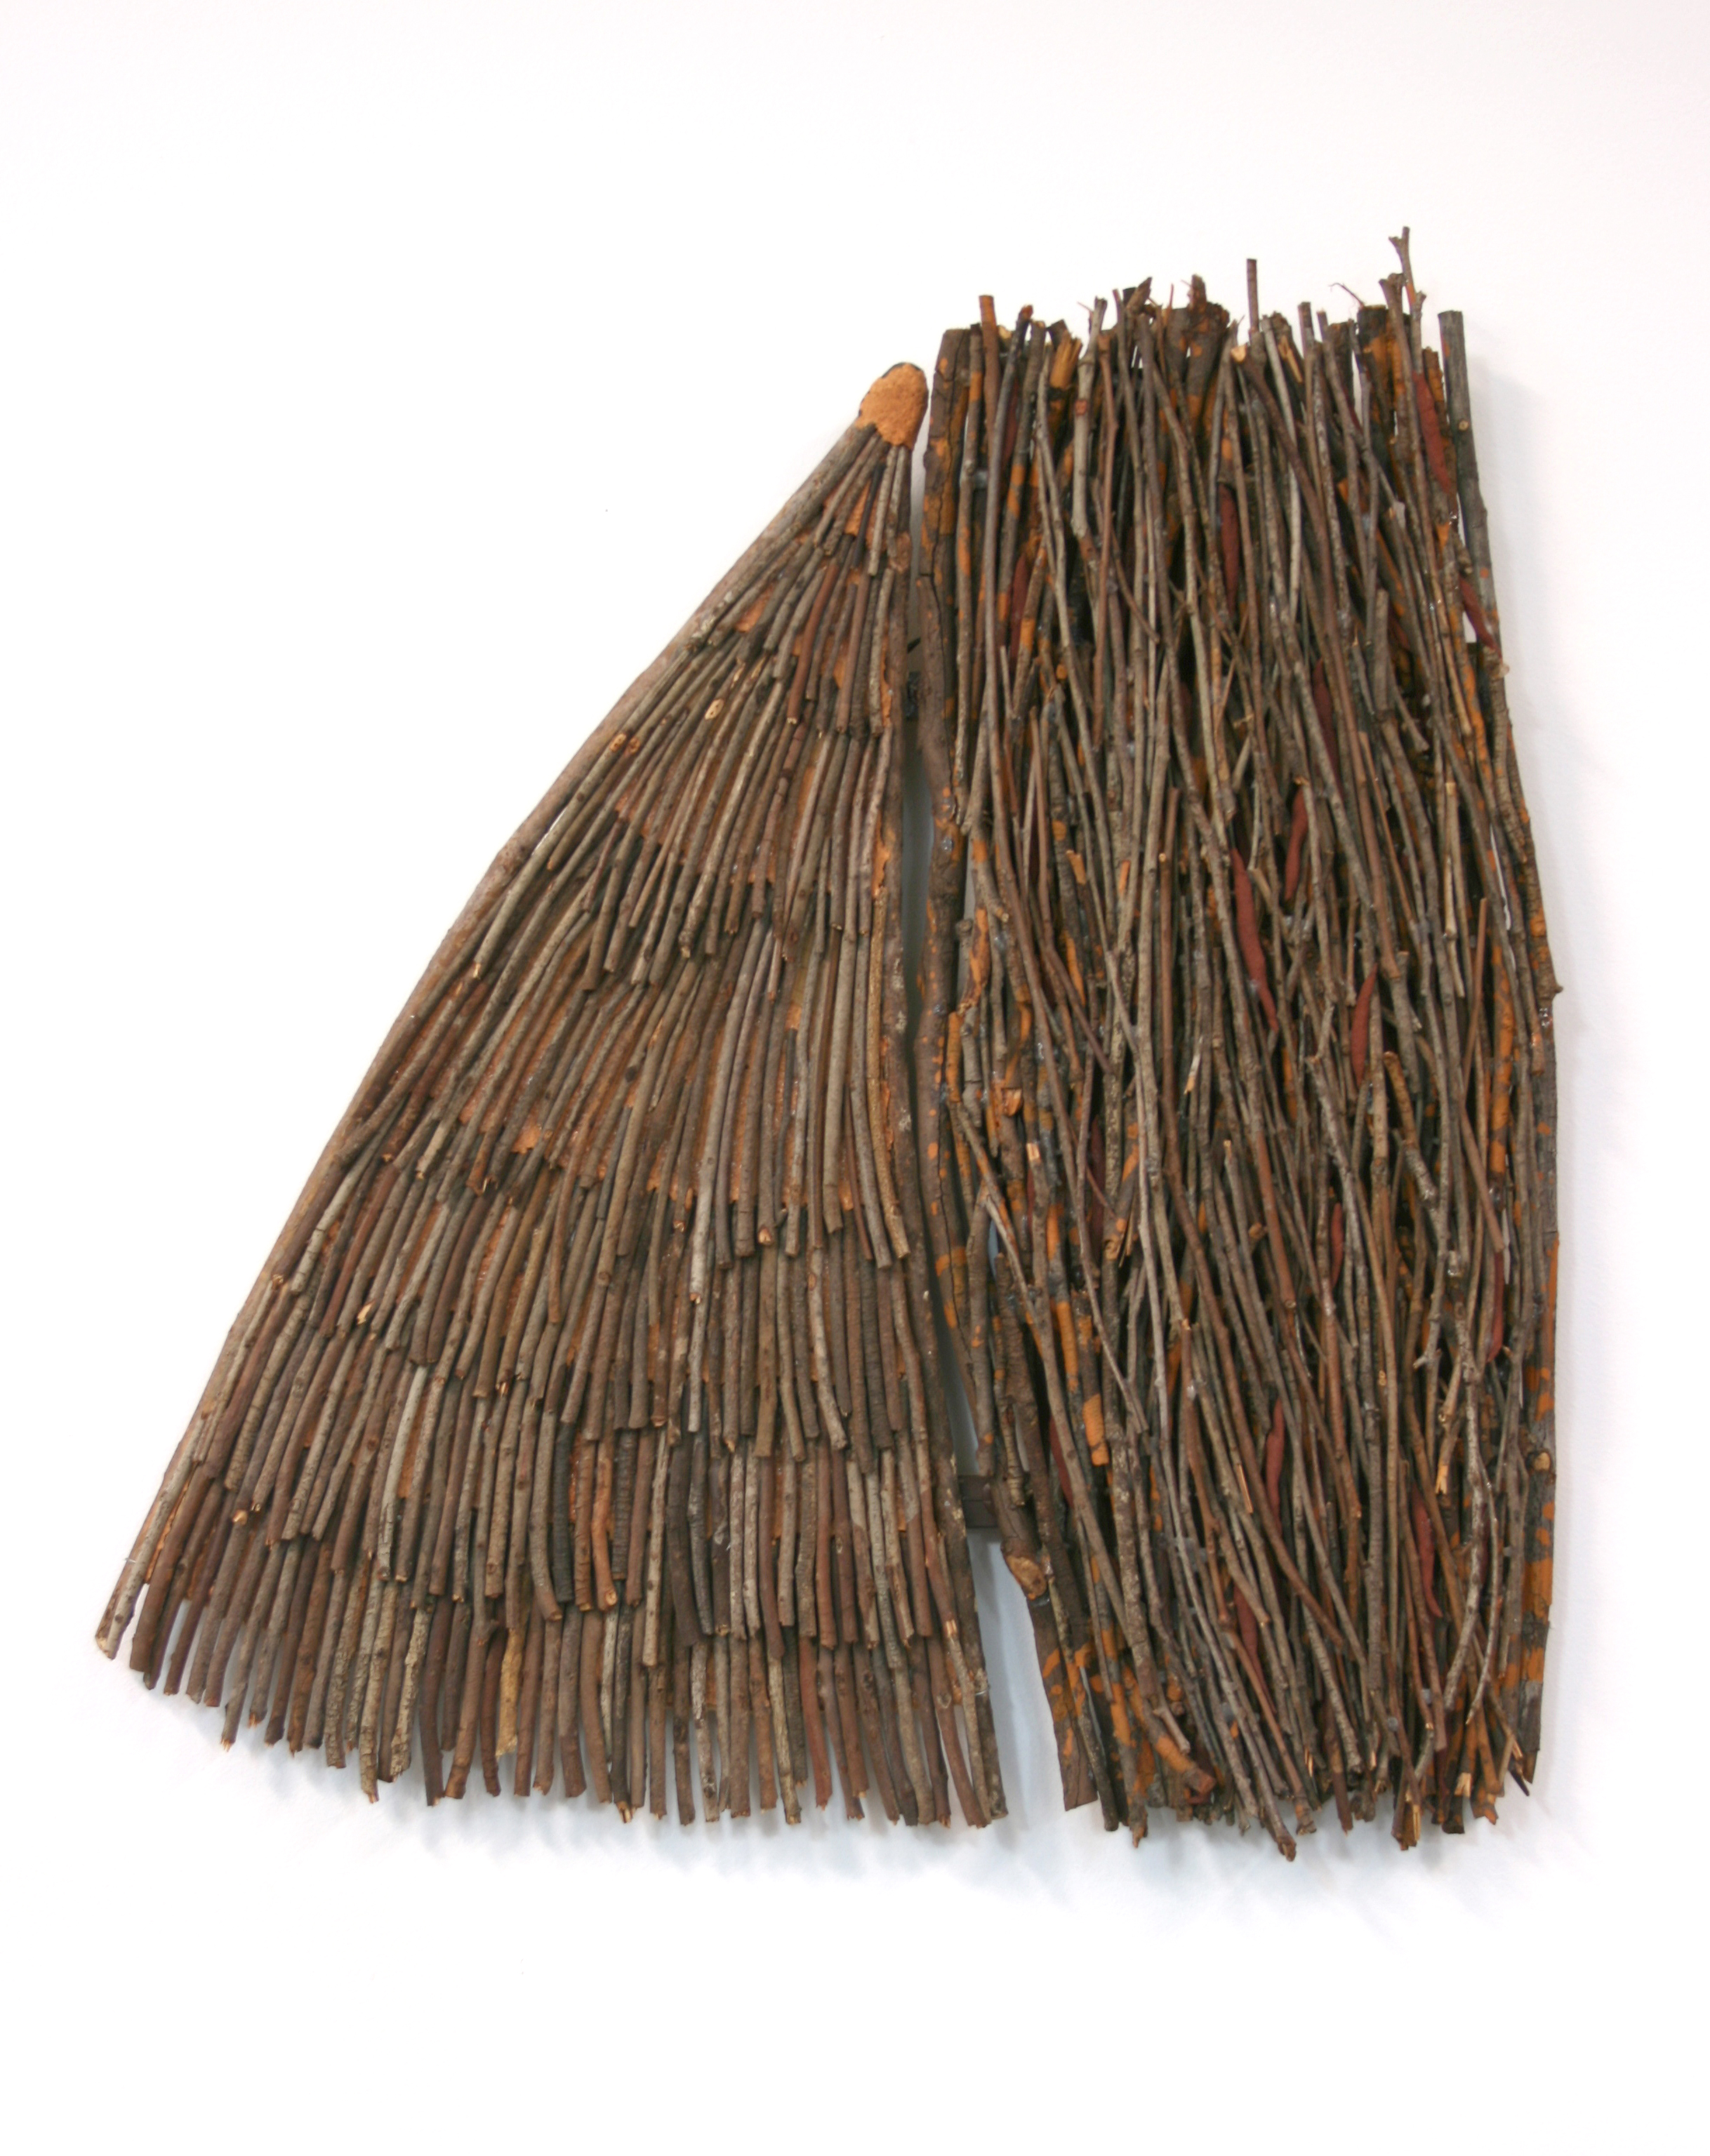 A sculpture of tightly packed eucalyptus twigs against a white background